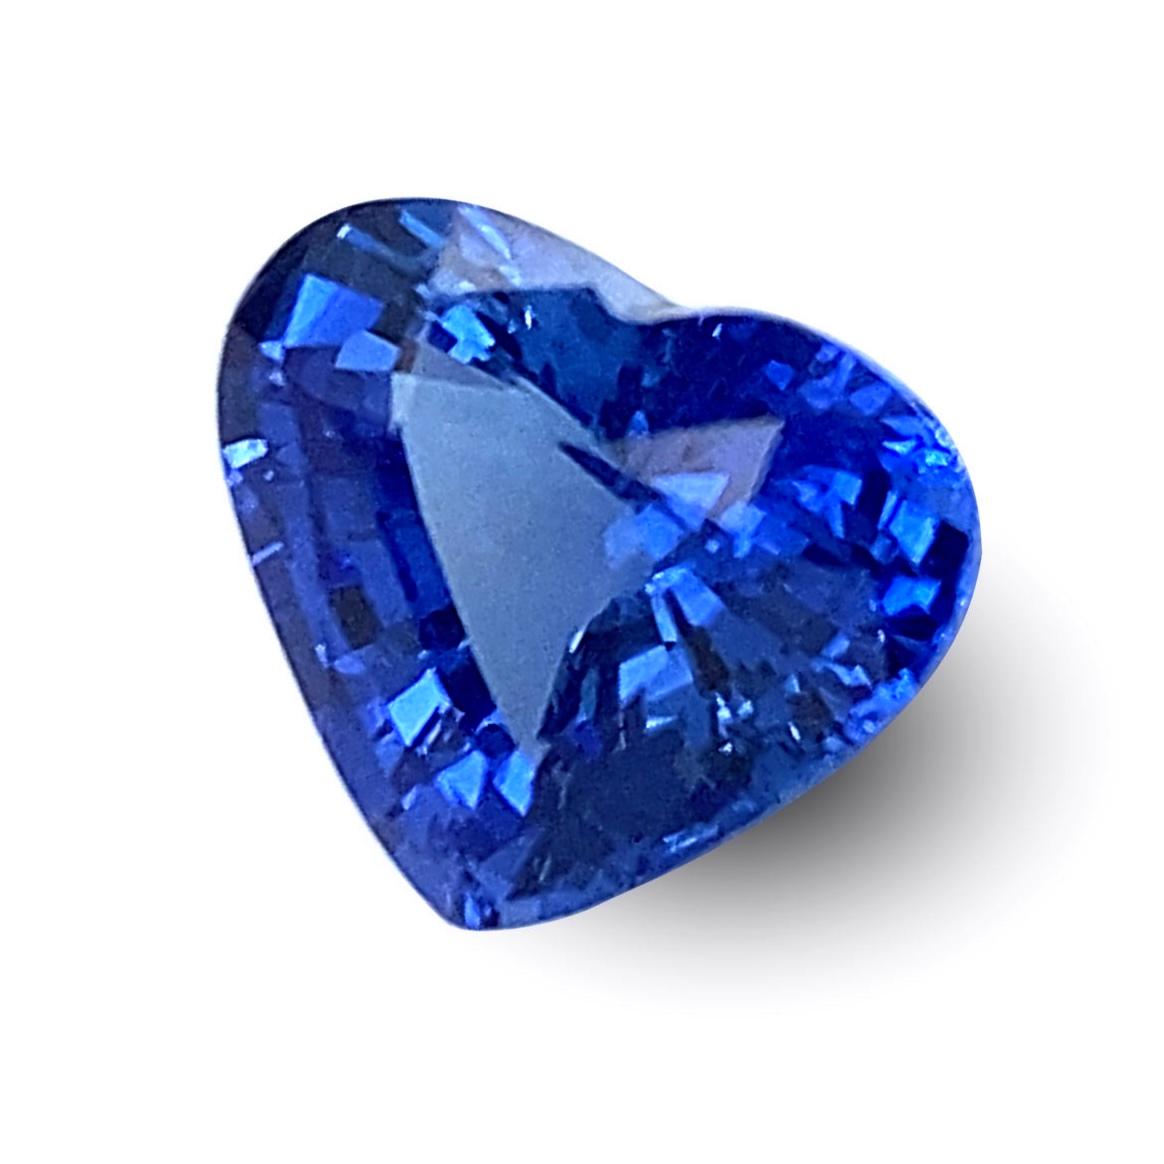 Mixed Cut GIA Certified 2.60 Carats Heated Blue Sapphire  For Sale